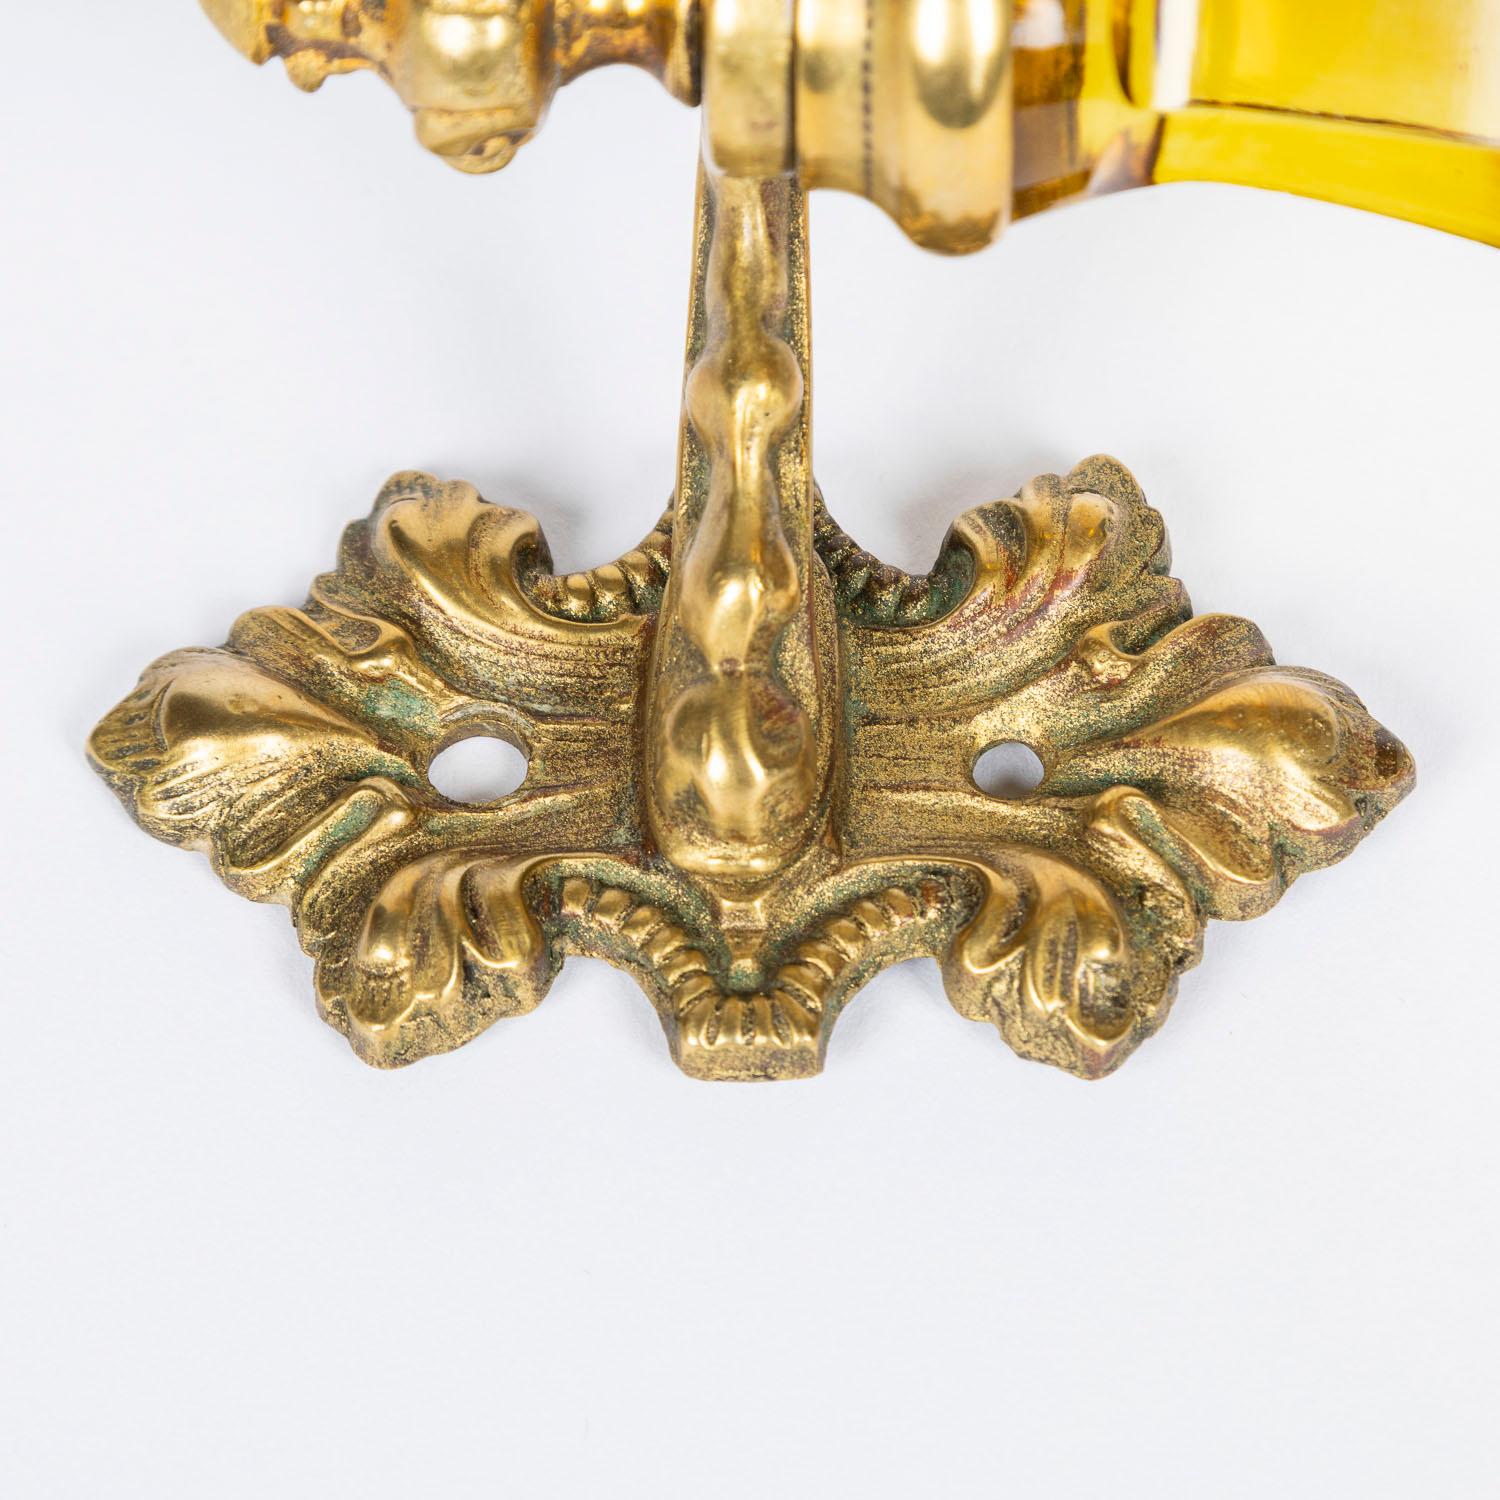 19th Century Gilt Brass Door Handles with Amber Coloured Cut Glass For Sale